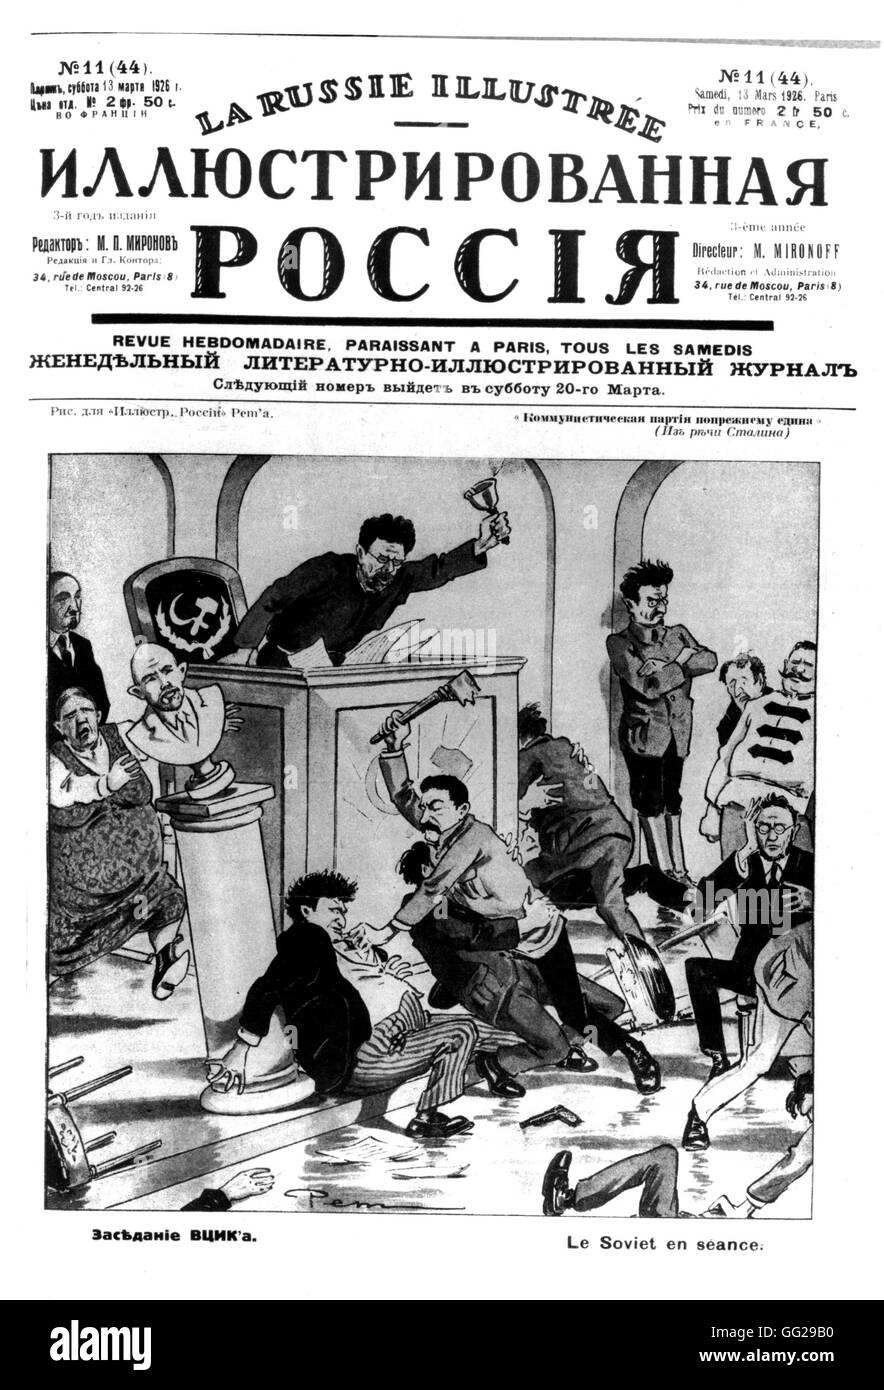 Satirical cartoon on a Soviet session. Trotsky, on the r., Kalinin in the gallery, Stalin beating up Kamenev. in 'Russia illustrated', magazine published in Paris.  1926 U.S.S.R. Stock Photo